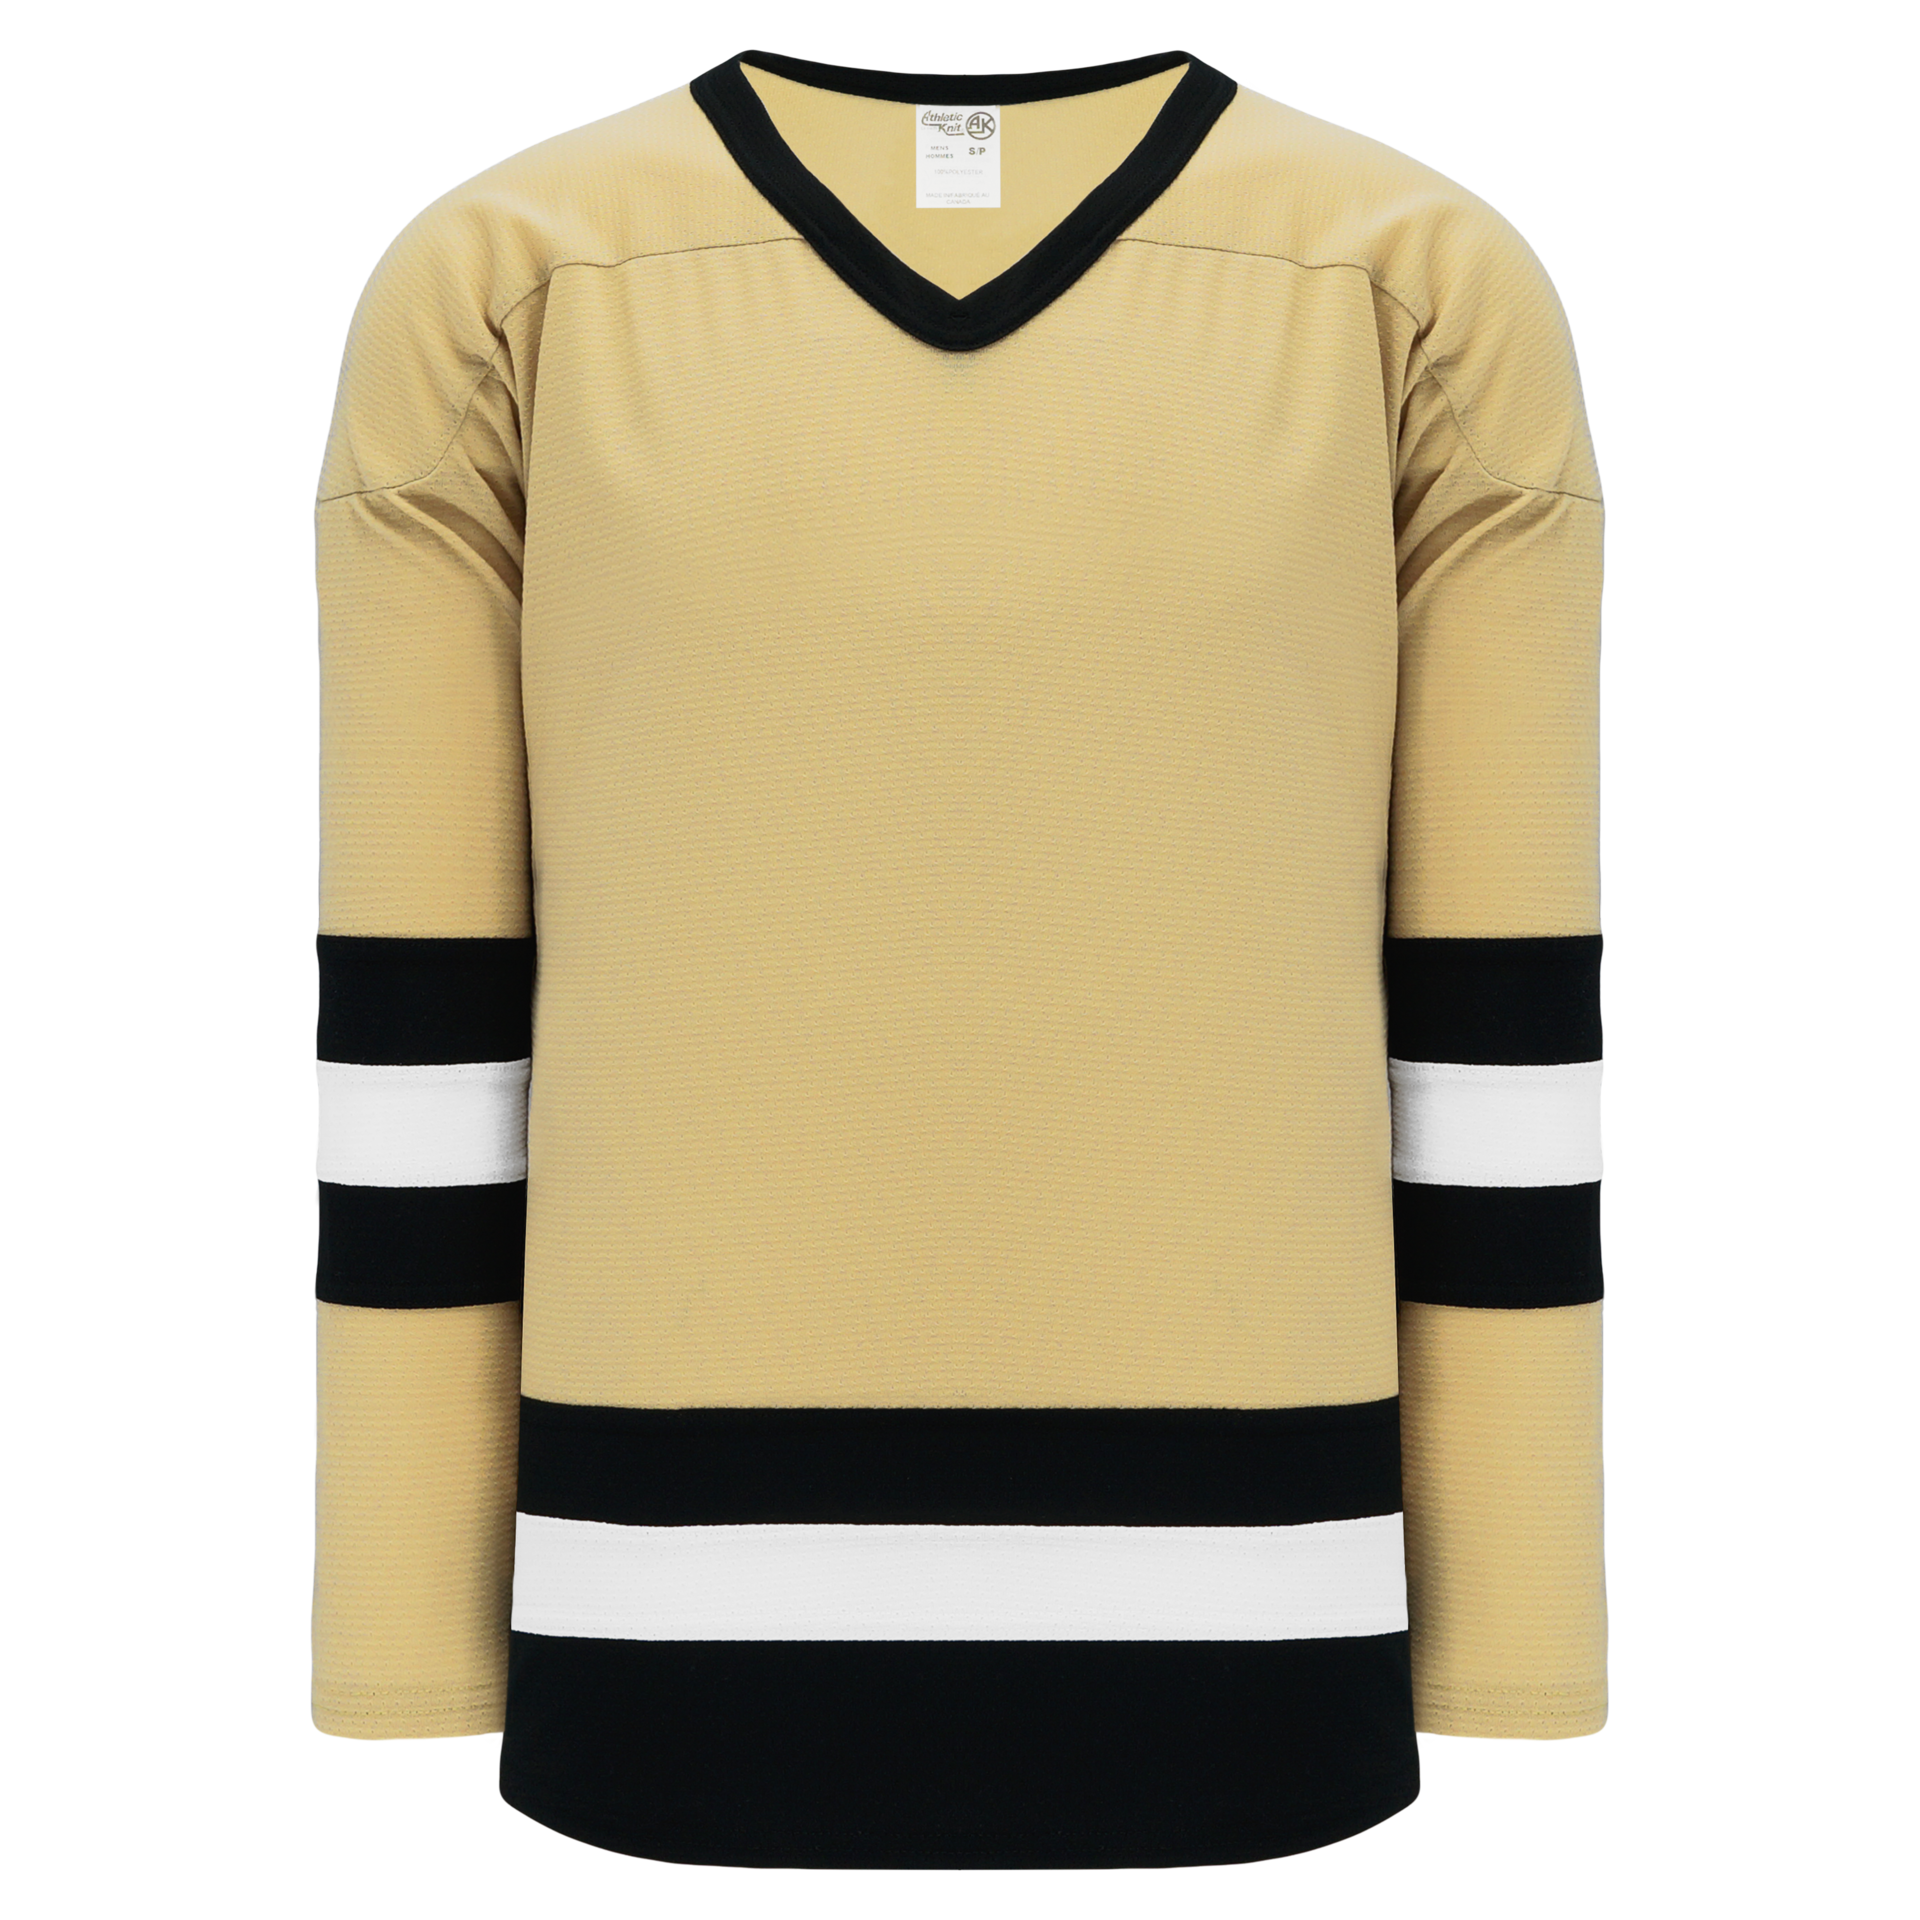 AthleticKnit: Fabrics and colors for your customised jerseys and